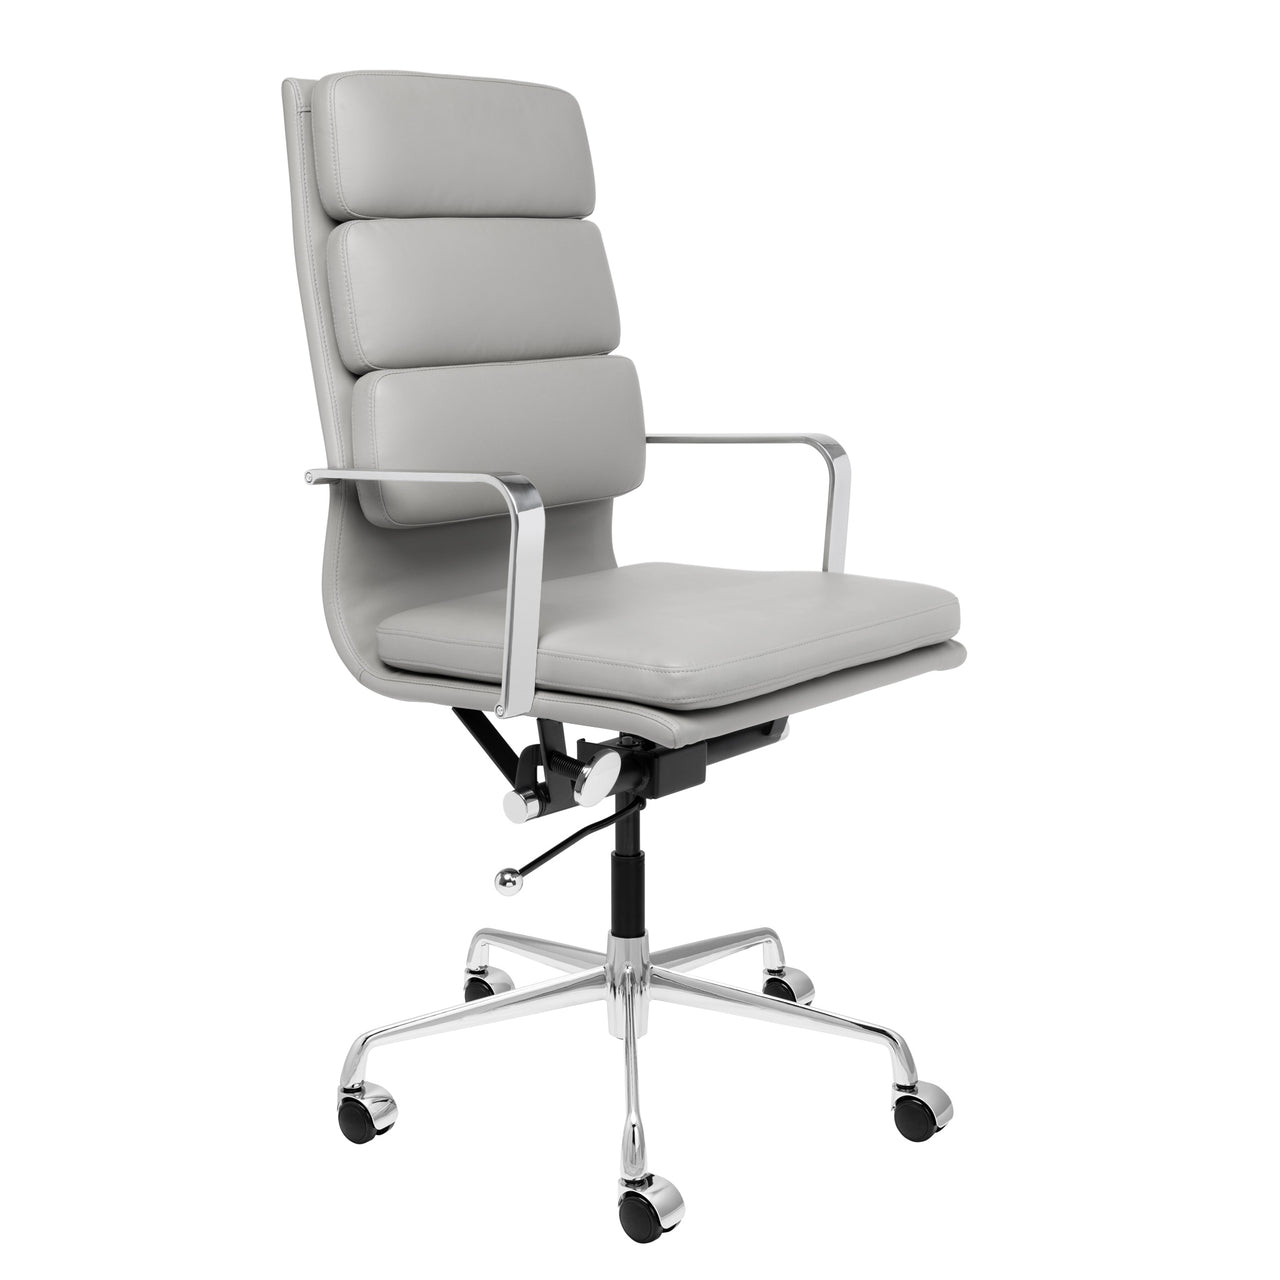 SOHO II Tall Back Padded Management Chair (Grey)